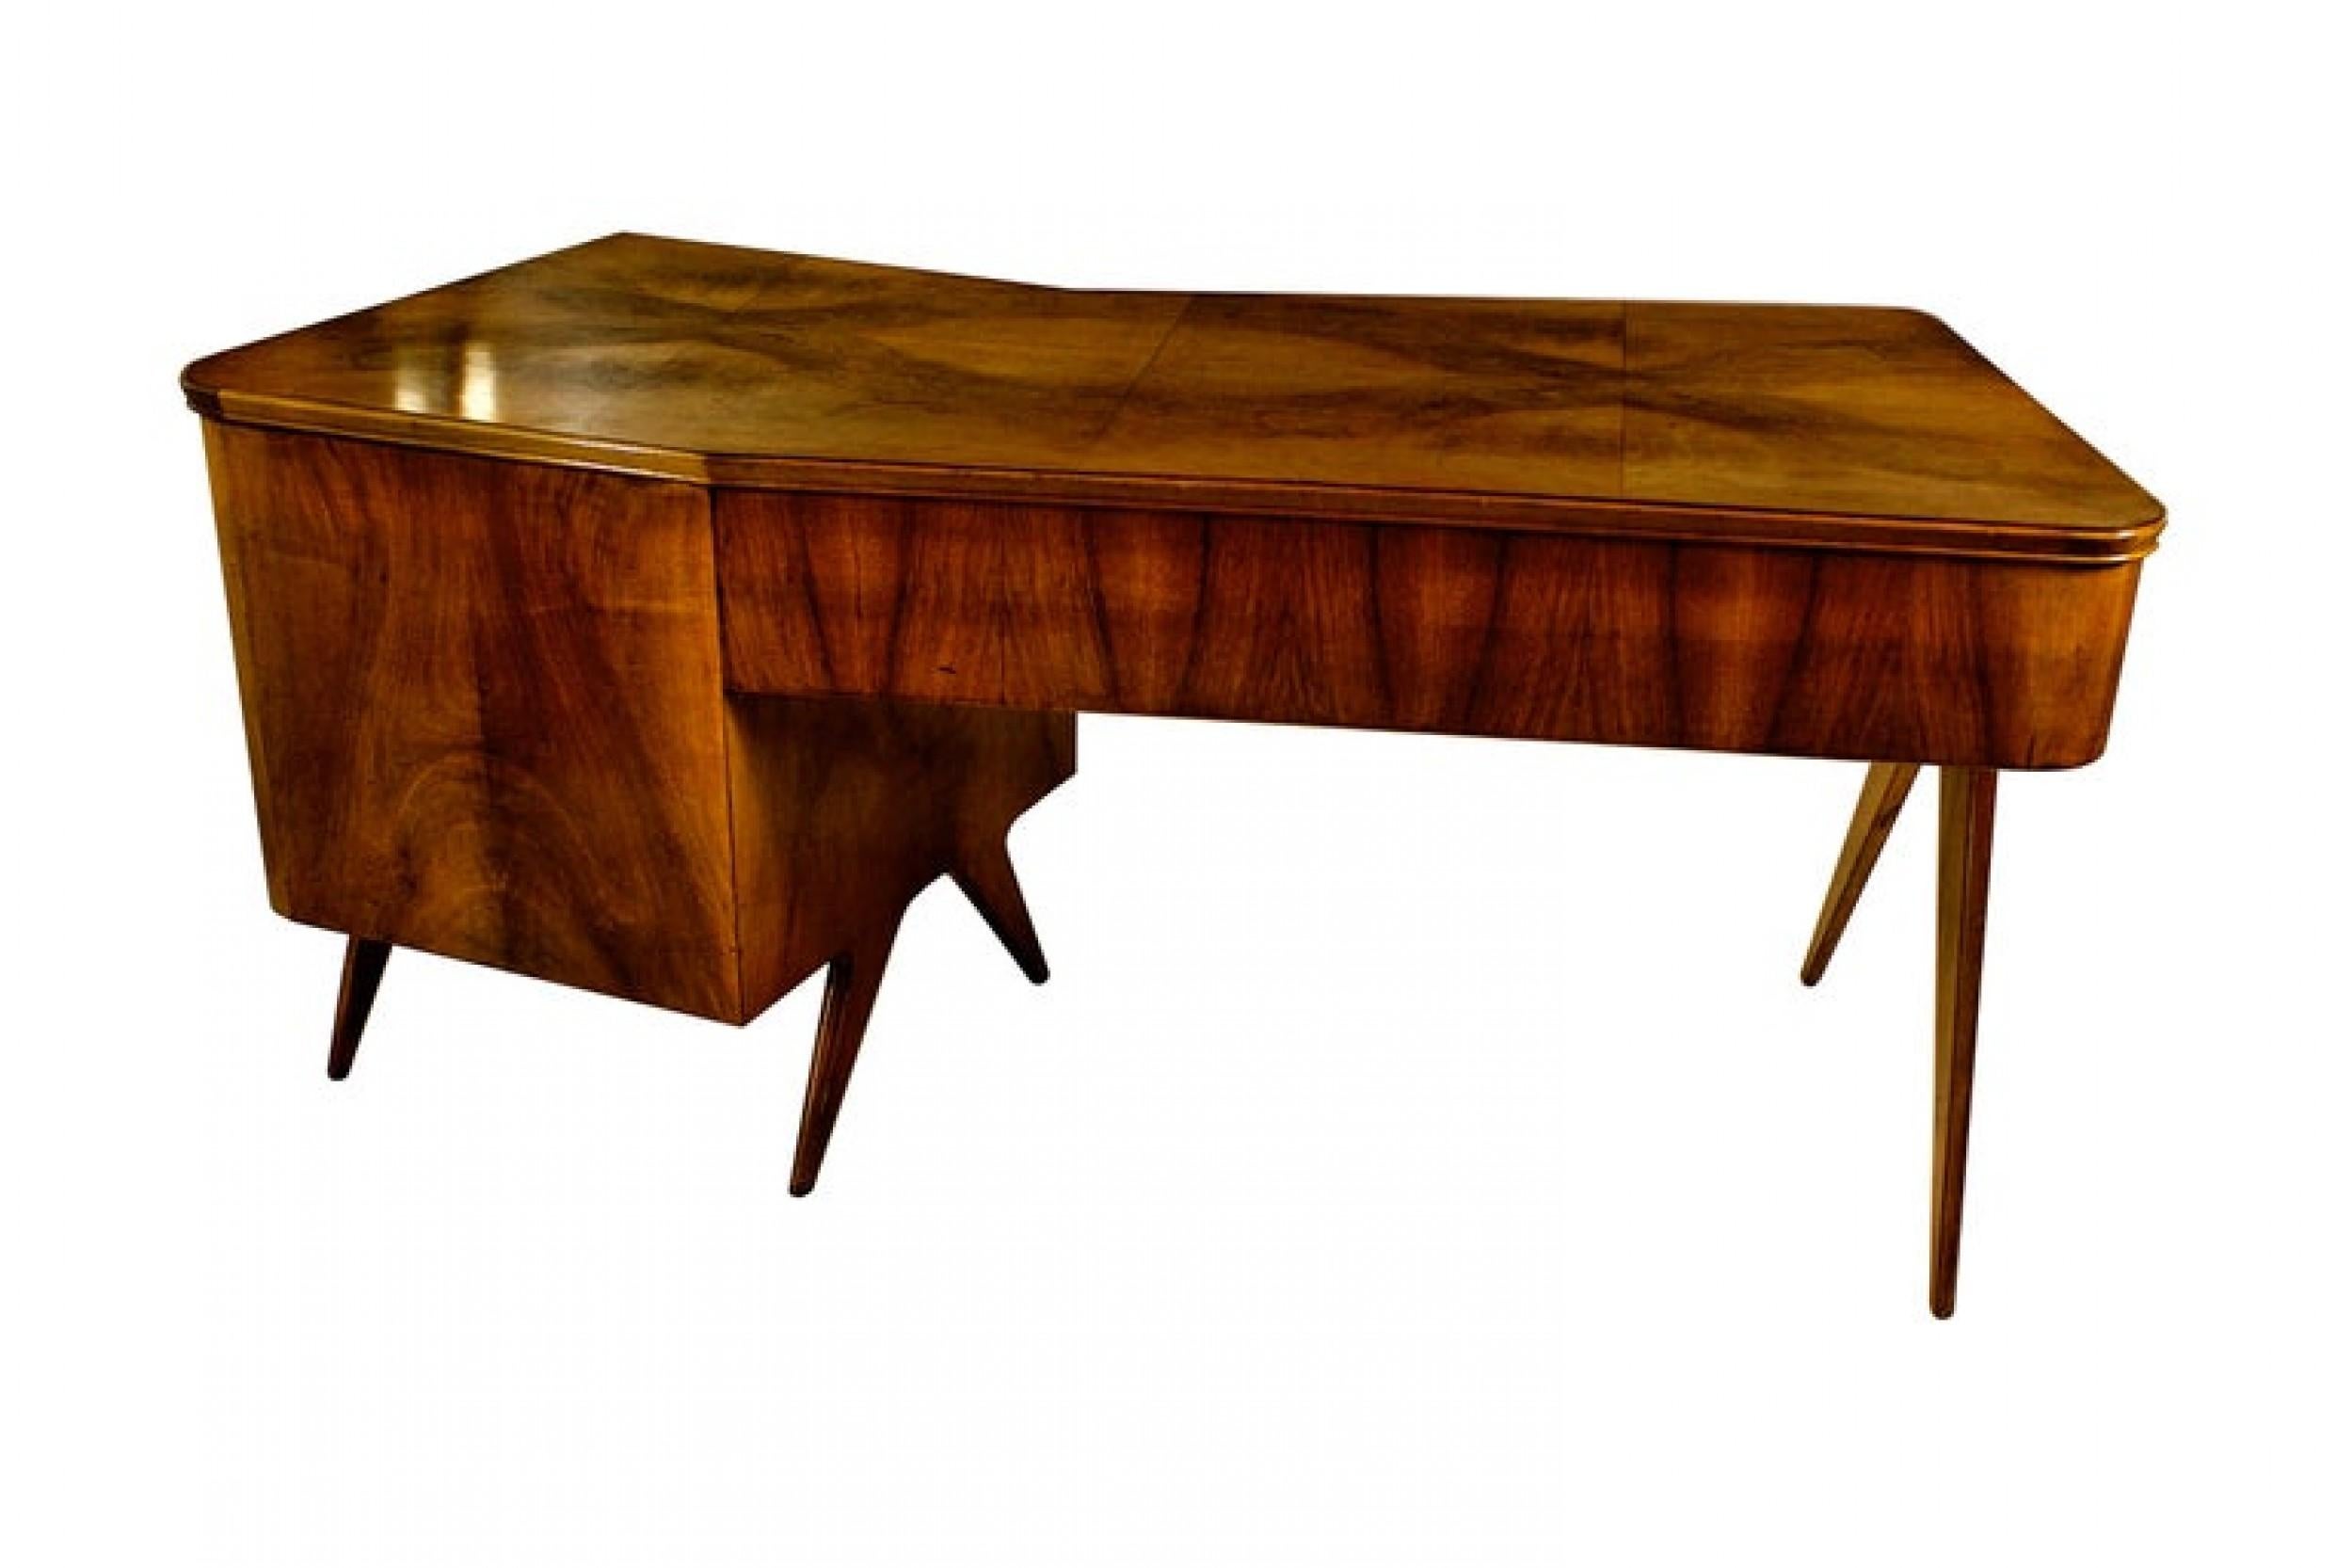 Italian Modern Walnut and Rootwood Desk, Attributed to Gio Ponti For Sale 2